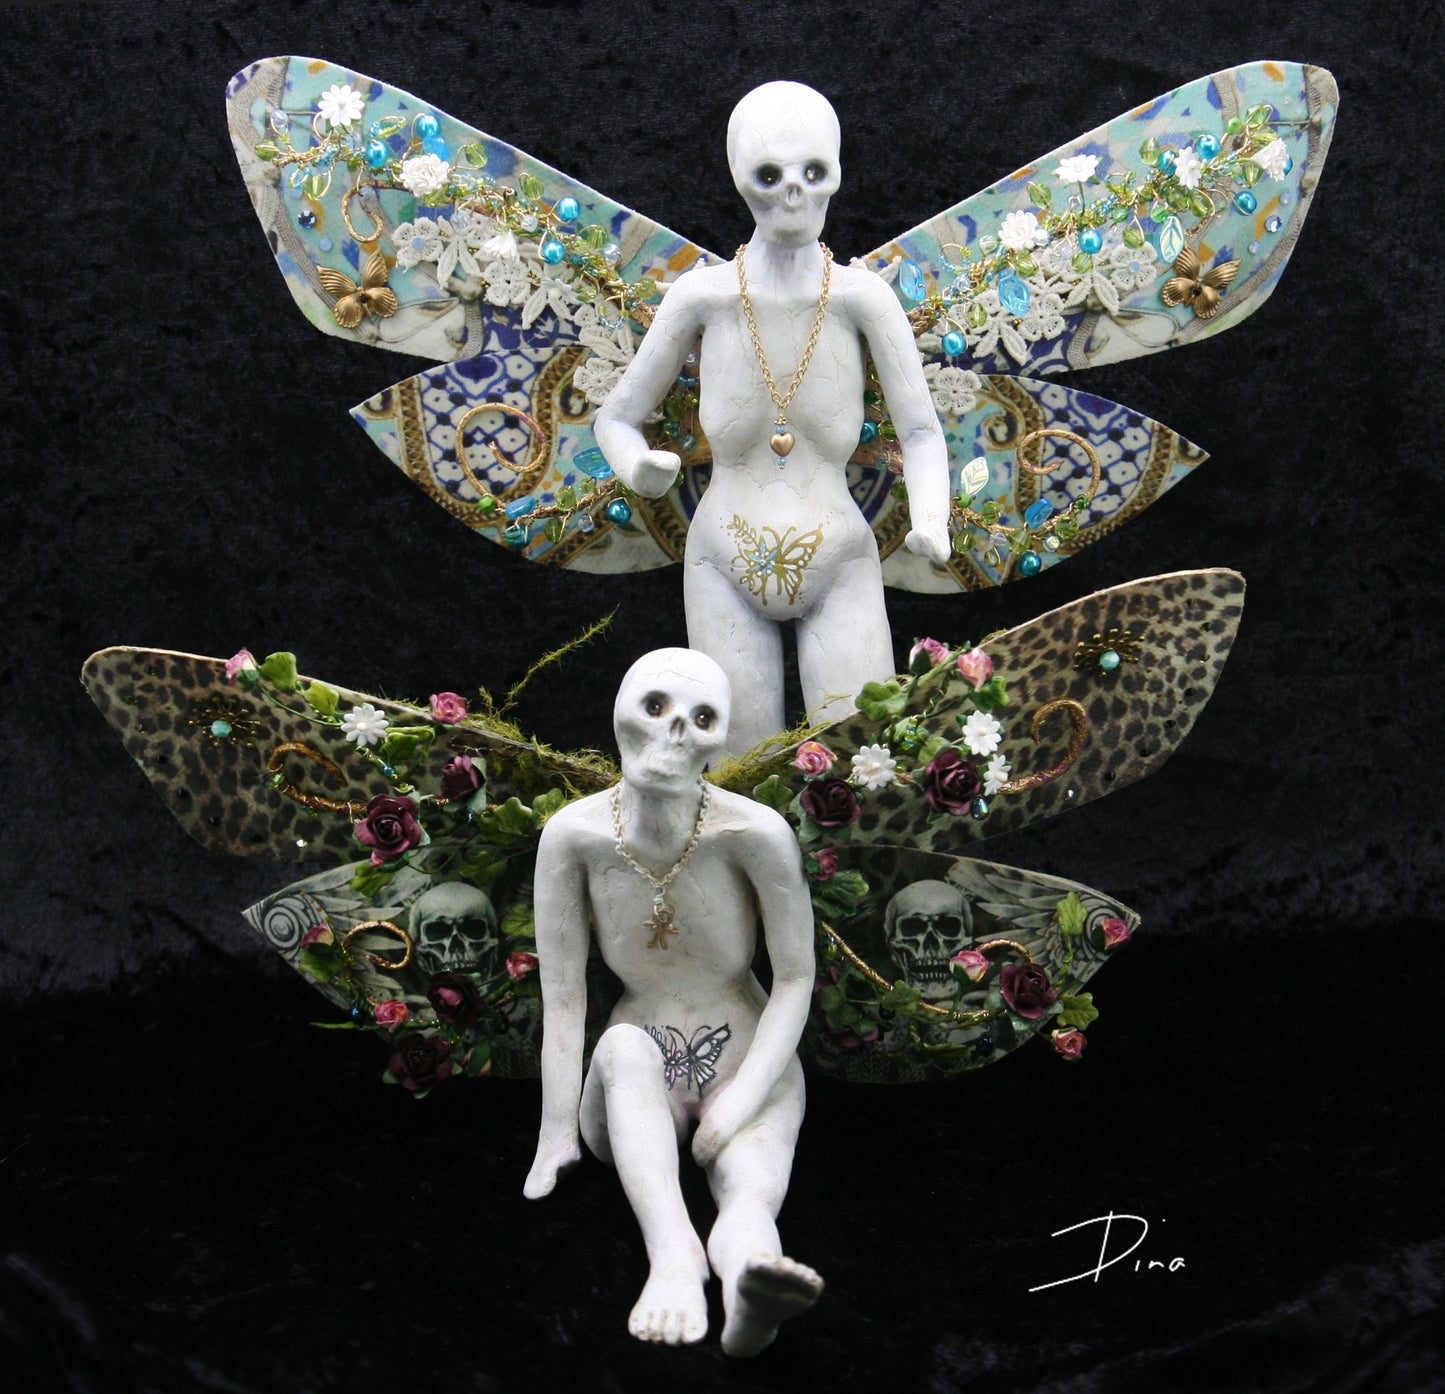 Zombie dead fairy - Collectible ooak handmade doll - Whimsical standing skeleton